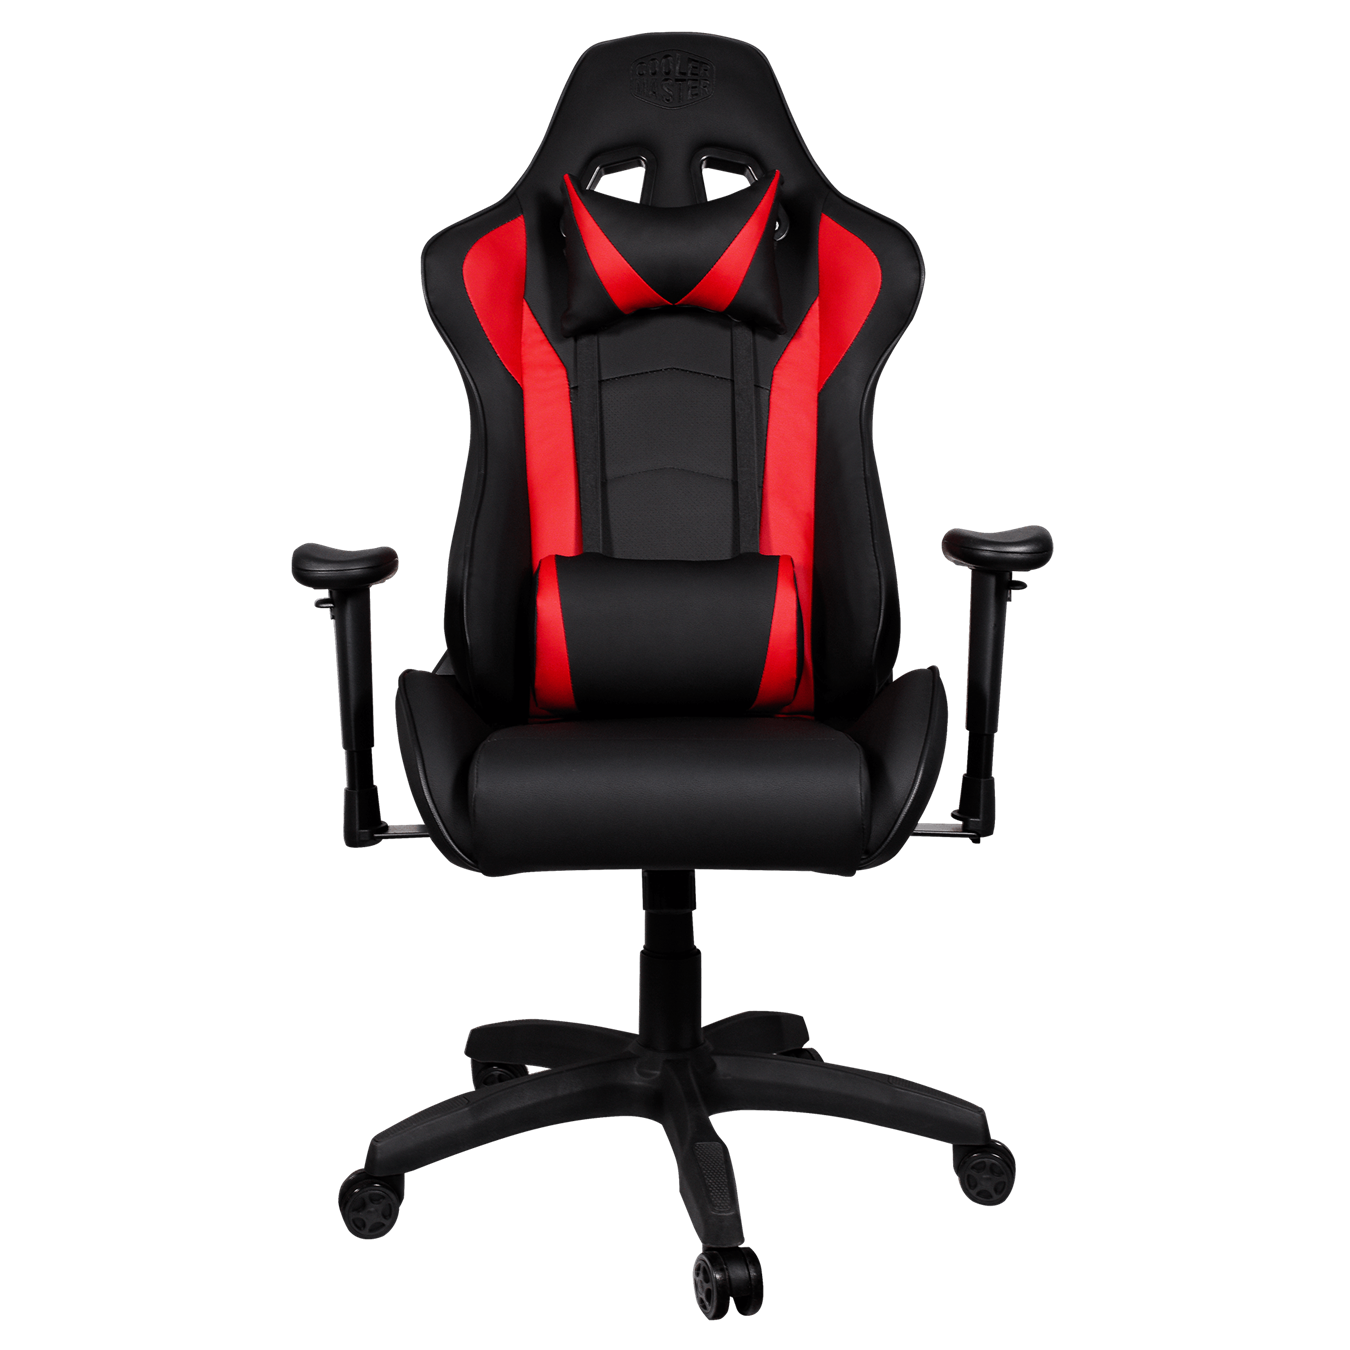 Caliber R1 Red - The headrest and lumbar pillow will provide you with the best level of comfort to reduce back pain and alleviate neck strain.